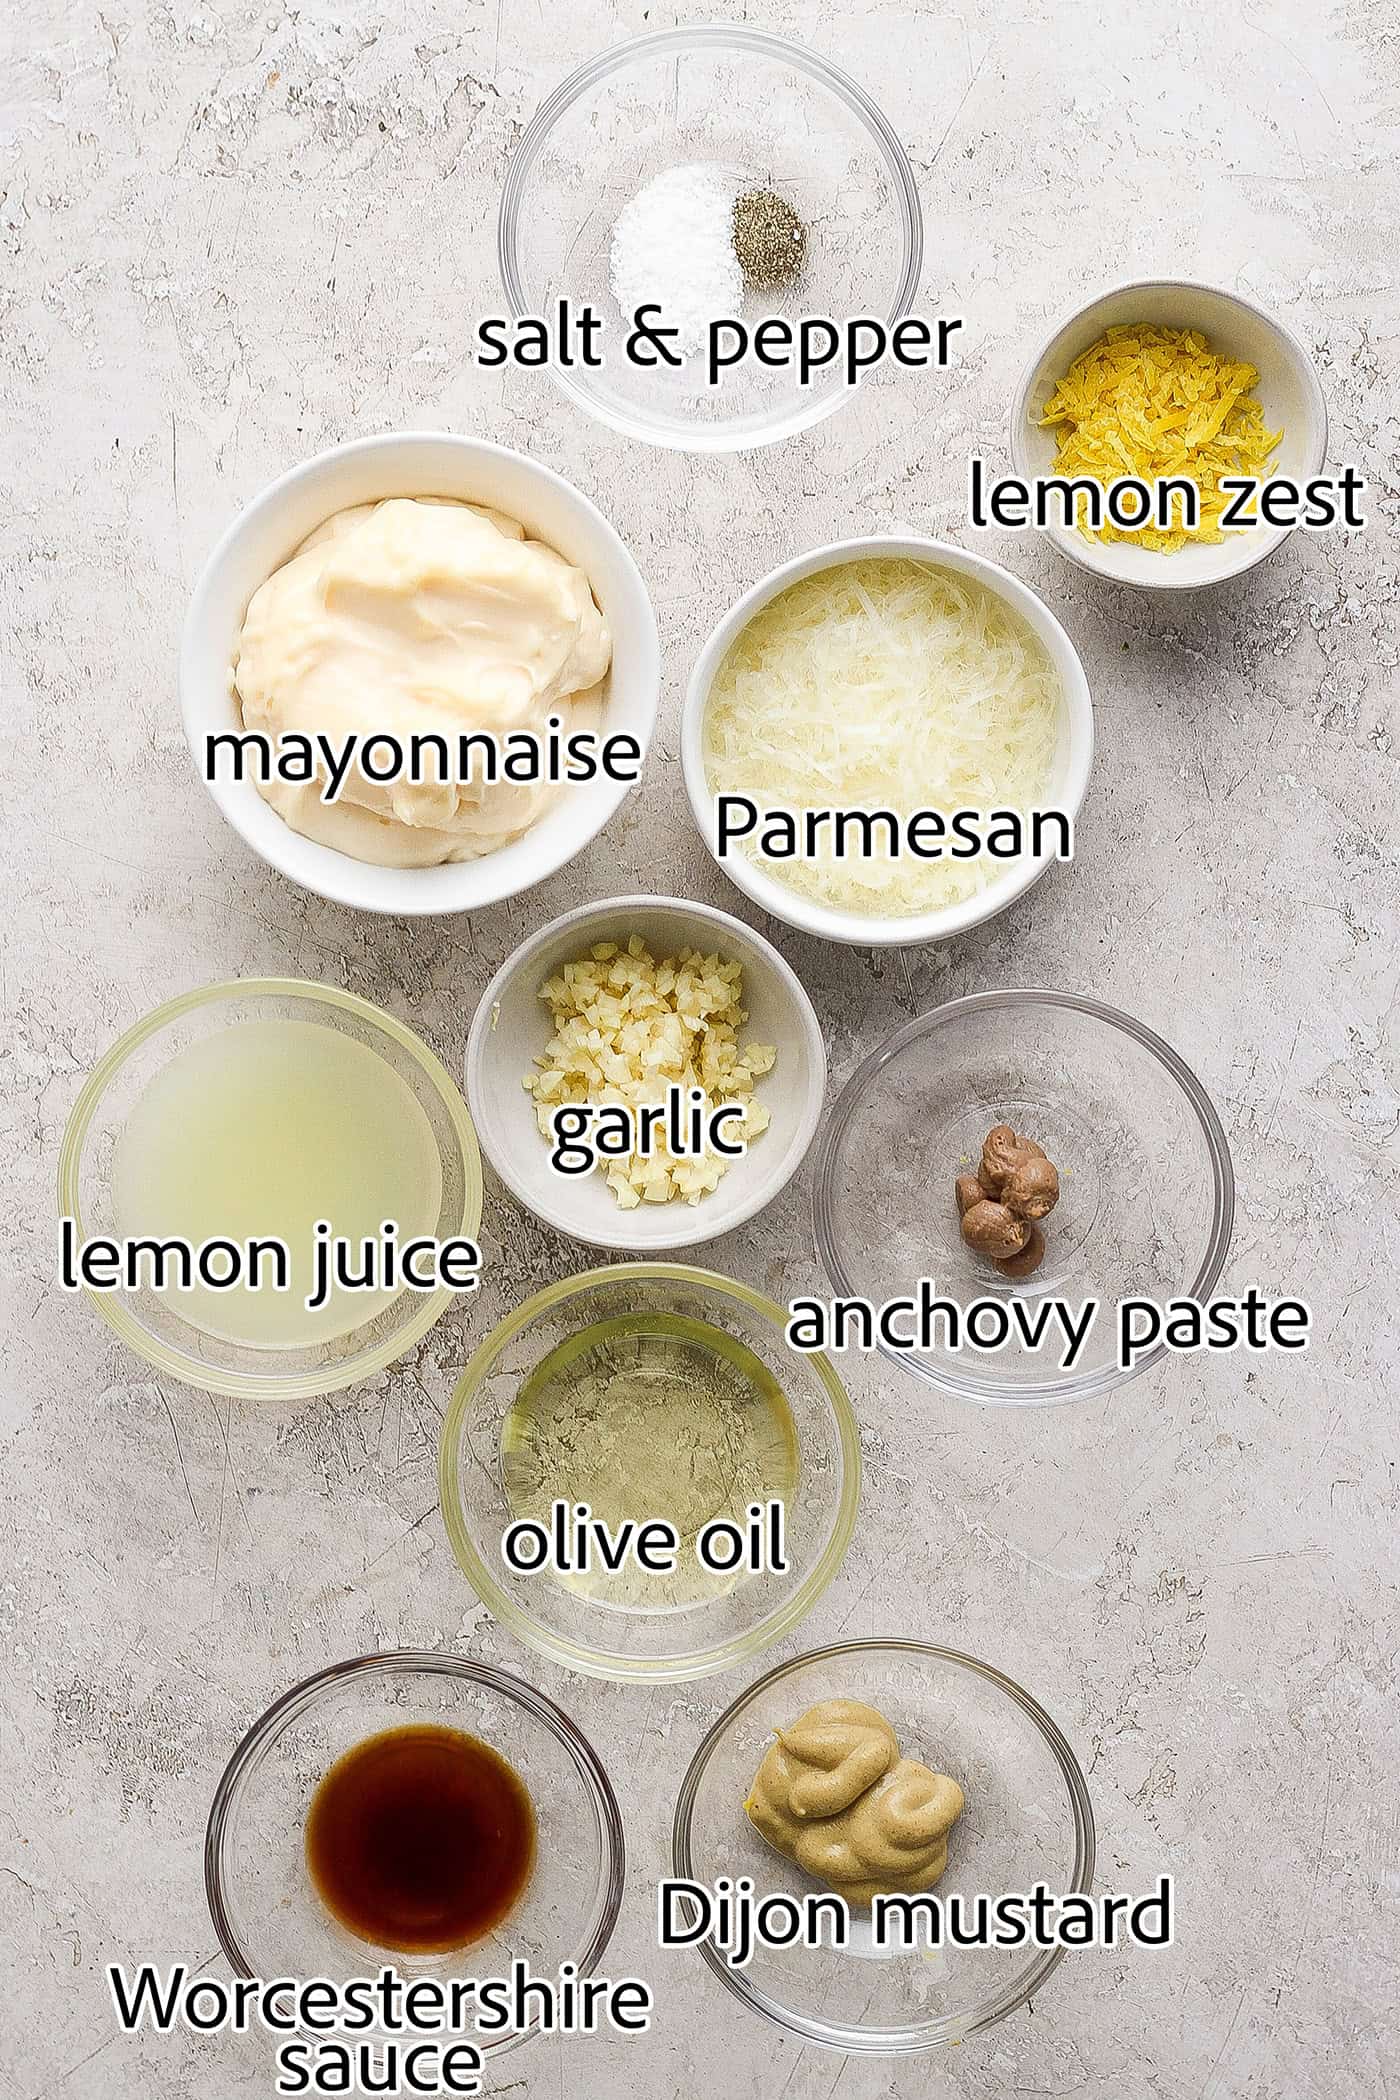 Ingredients for caesar dressing are shown portioned out and labelled: lemon zest and juice, mayonnaise, parmesan cheese, anchovy paste, salt and pepper, Worcestershire sauce, mustard, olive oil.